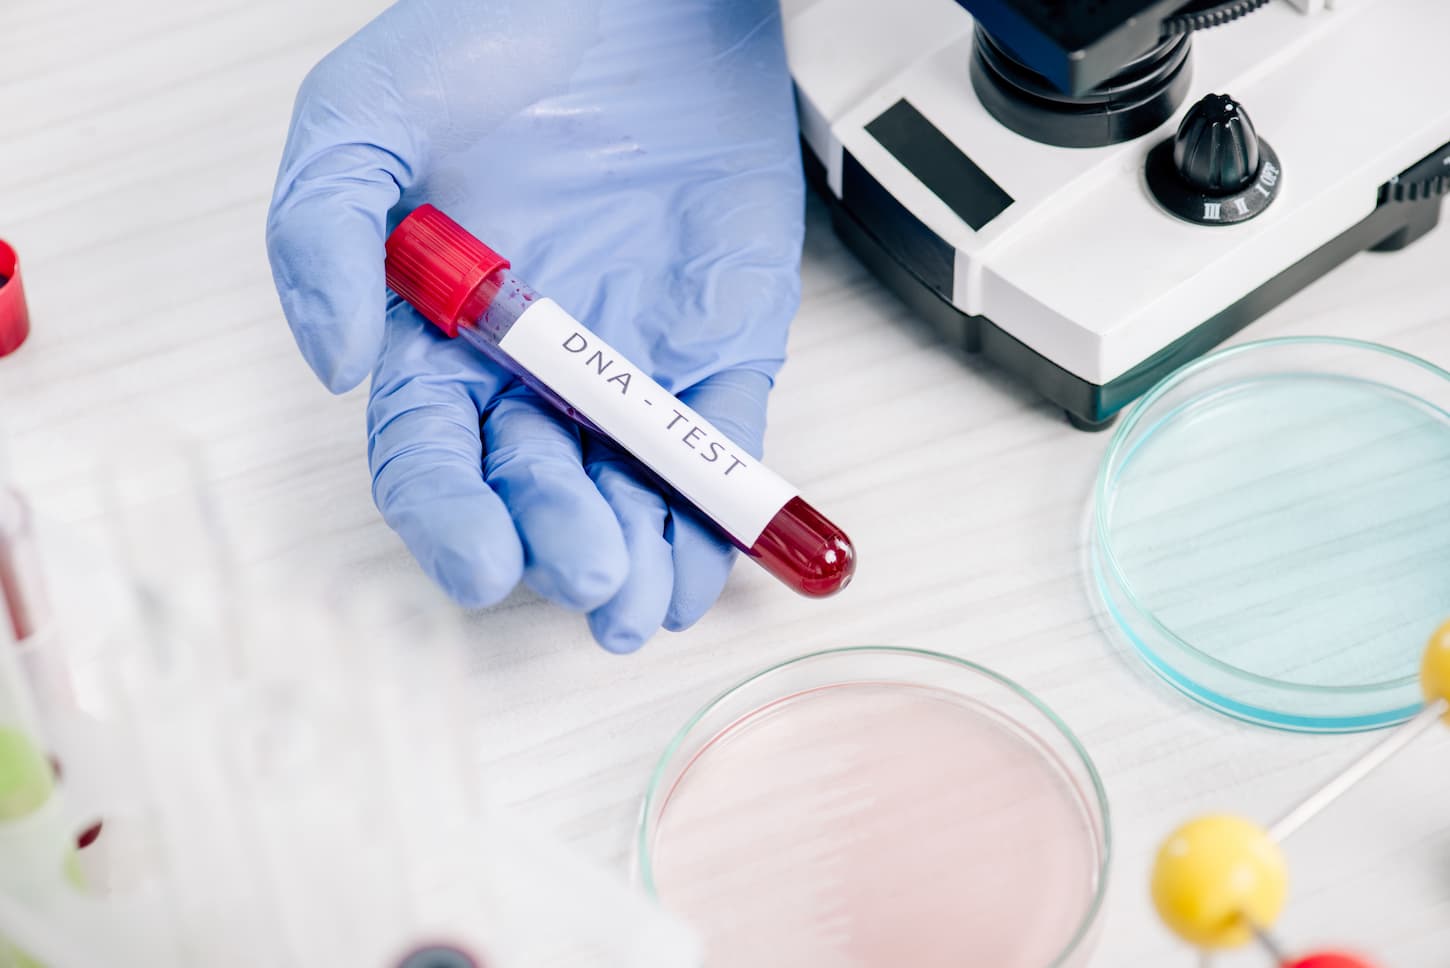 An image of a genetic consultant holding a test tube with DNA test lettering.